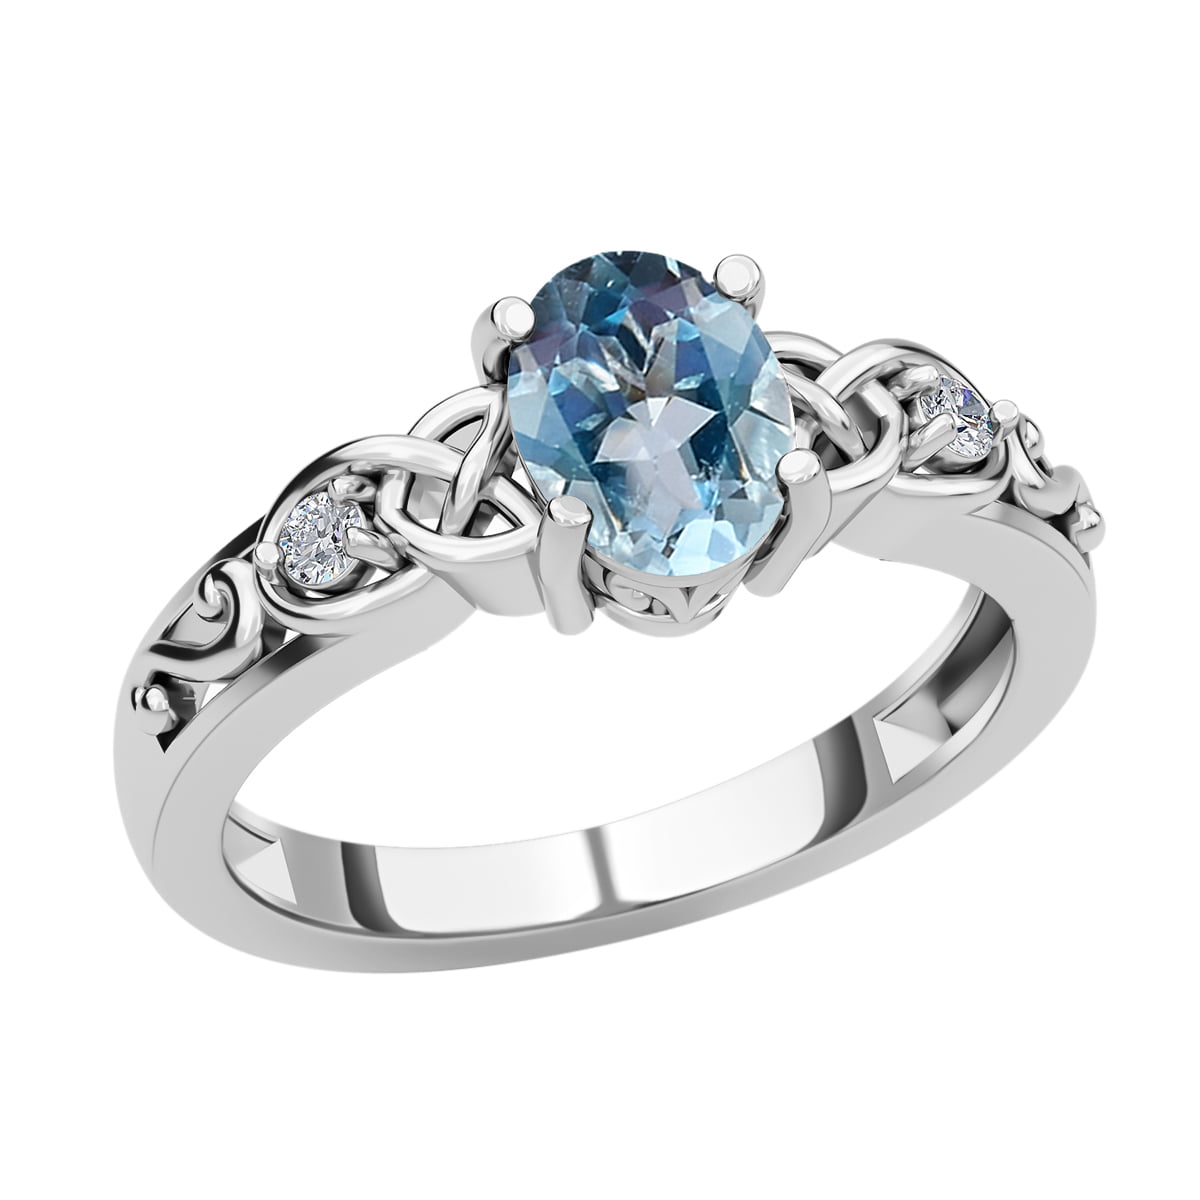 Shop LC 925 Sterling Silver Sky Blue Topaz White Topaz Statement Ring for Women Gifts Cttw 1.2 